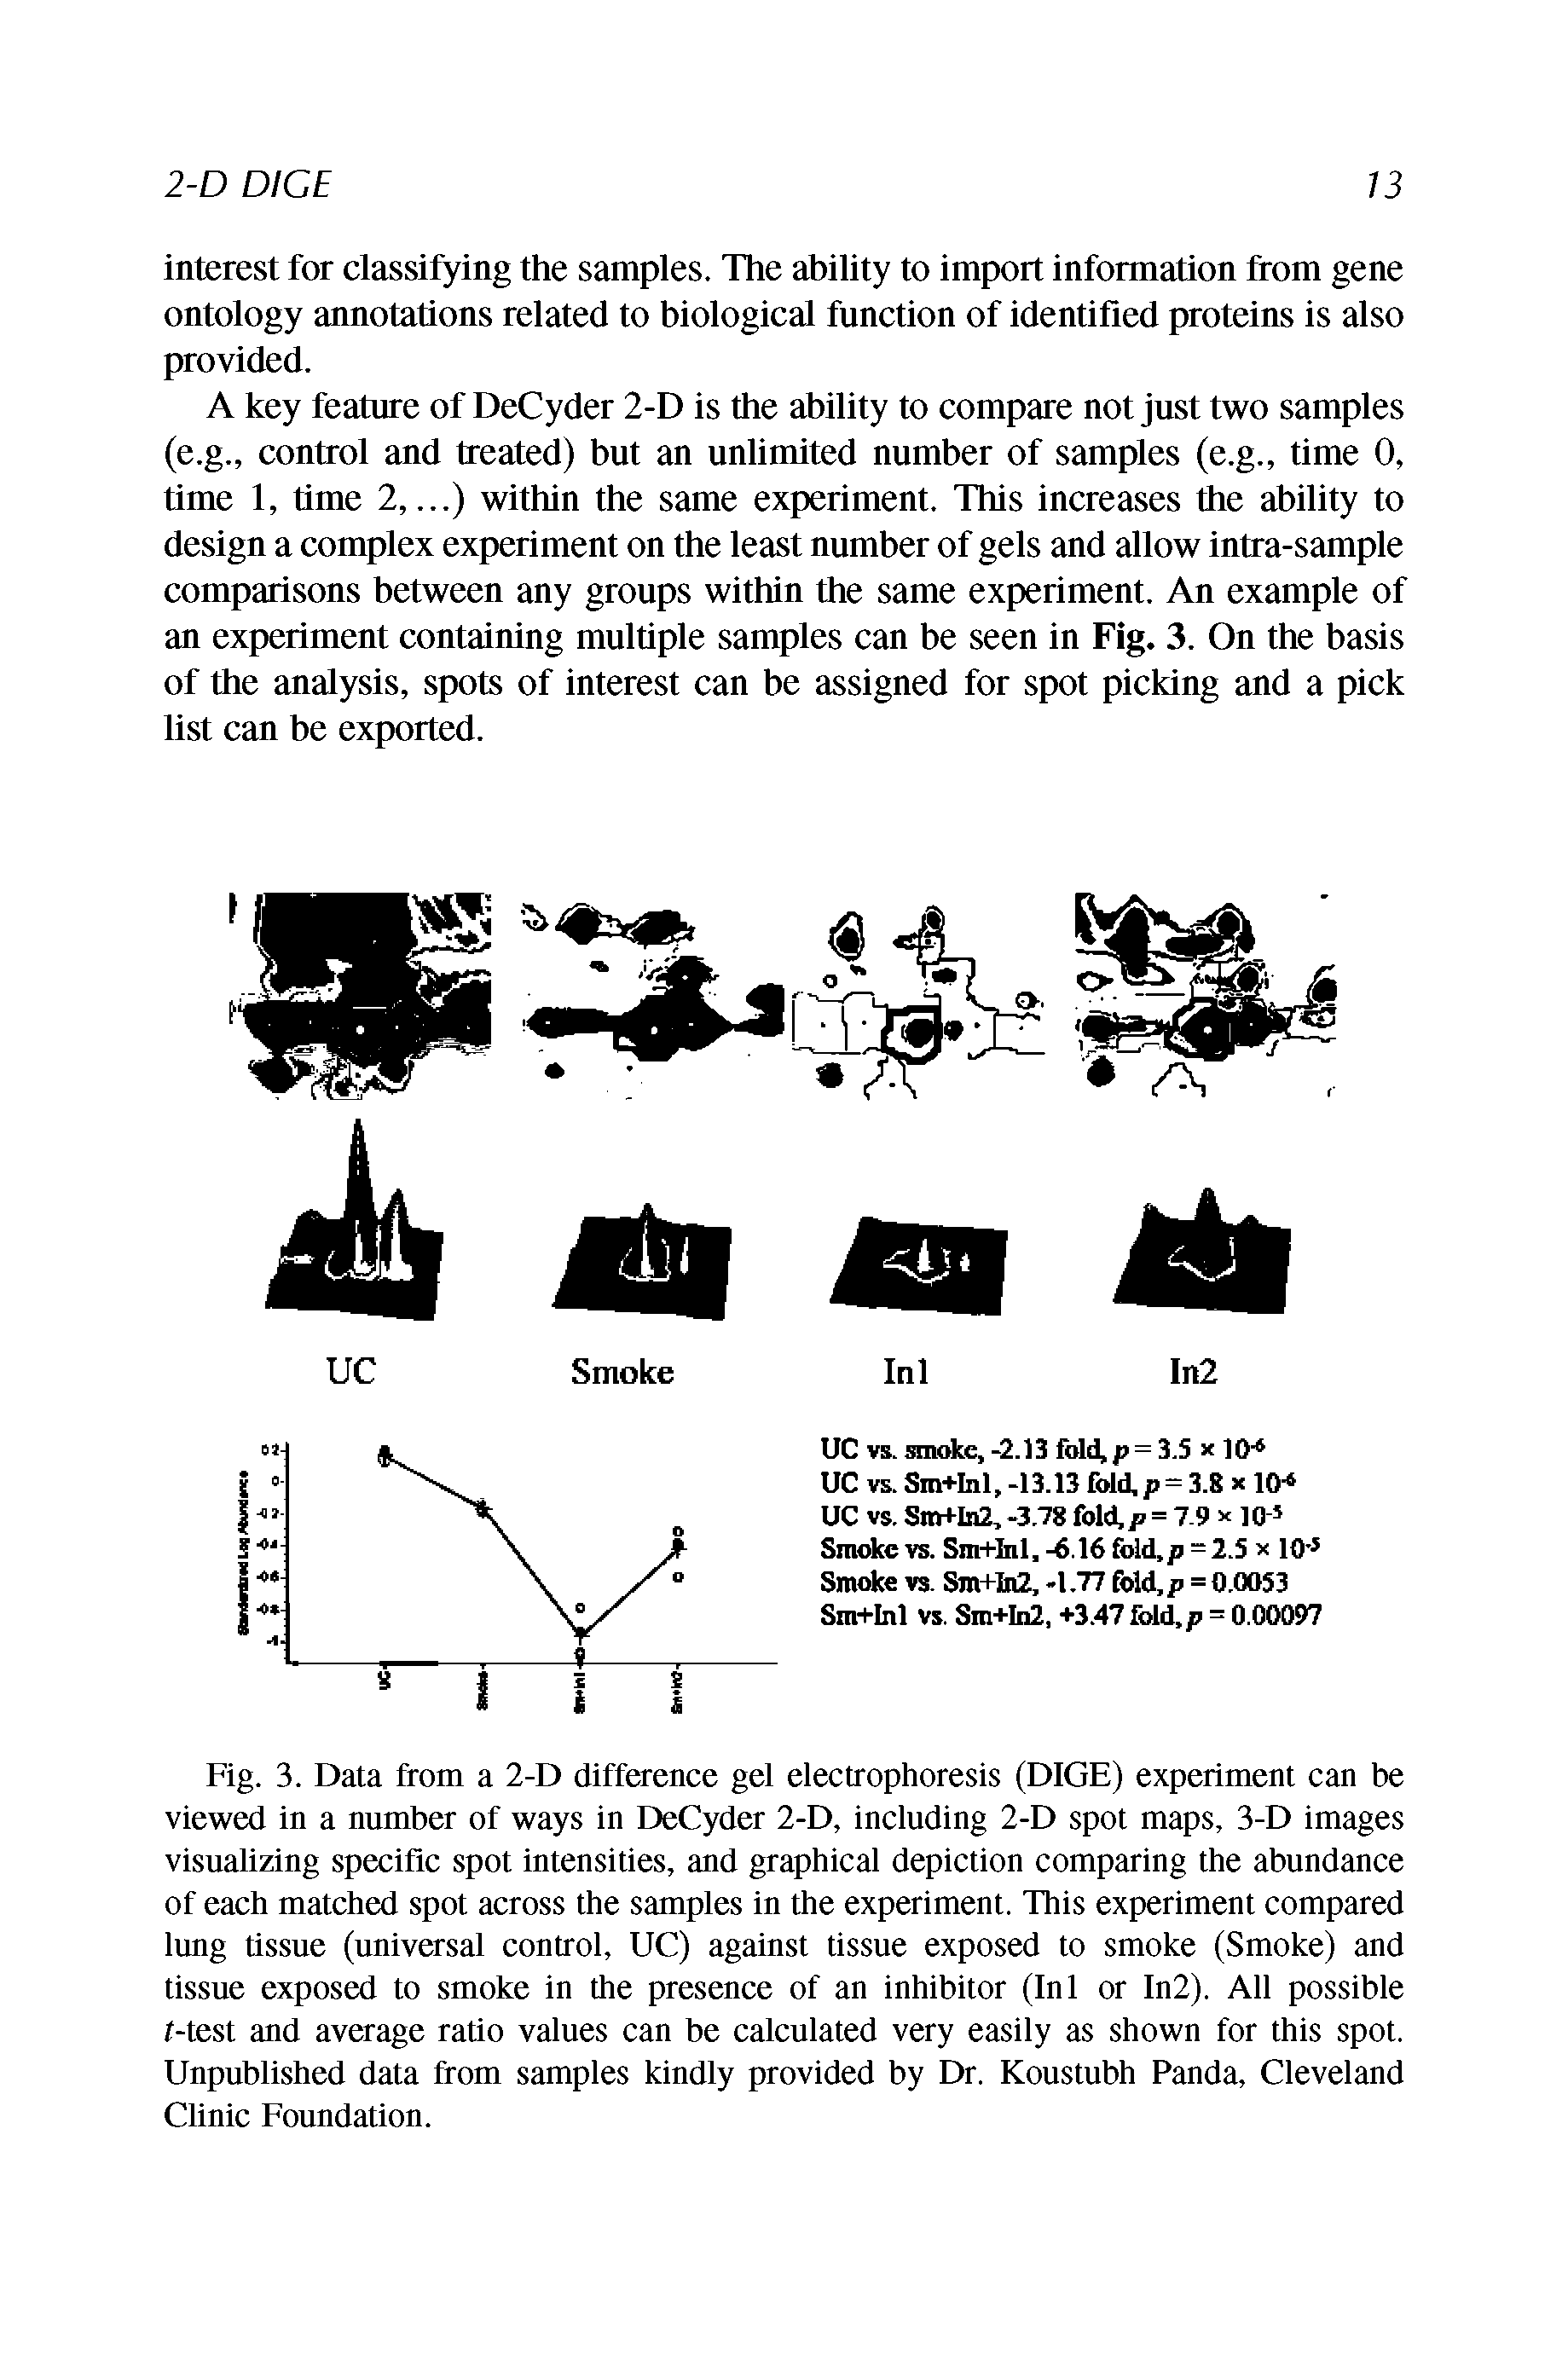 Fig. 3. Data from a 2-D difference gel electrophoresis (DICE) experiment can be viewed in a number of ways in DeCyder 2-D, including 2-D spot maps, 3-D images visualizing specific spot intensities, and graphical depiction comparing the abundance of each matched spot across the samples in the experiment. This experiment compared lung tissue (universal control, UC) against tissue exposed to smoke (Smoke) and tissue exposed to smoke in the presence of an inhibitor (Ini or In2). All possible t-test and average ratio values can be calculated very easily as shown for this spot. Unpublished data from samples kindly provided by Dr. Koustubh Panda, Cleveland Clinic Foundation.